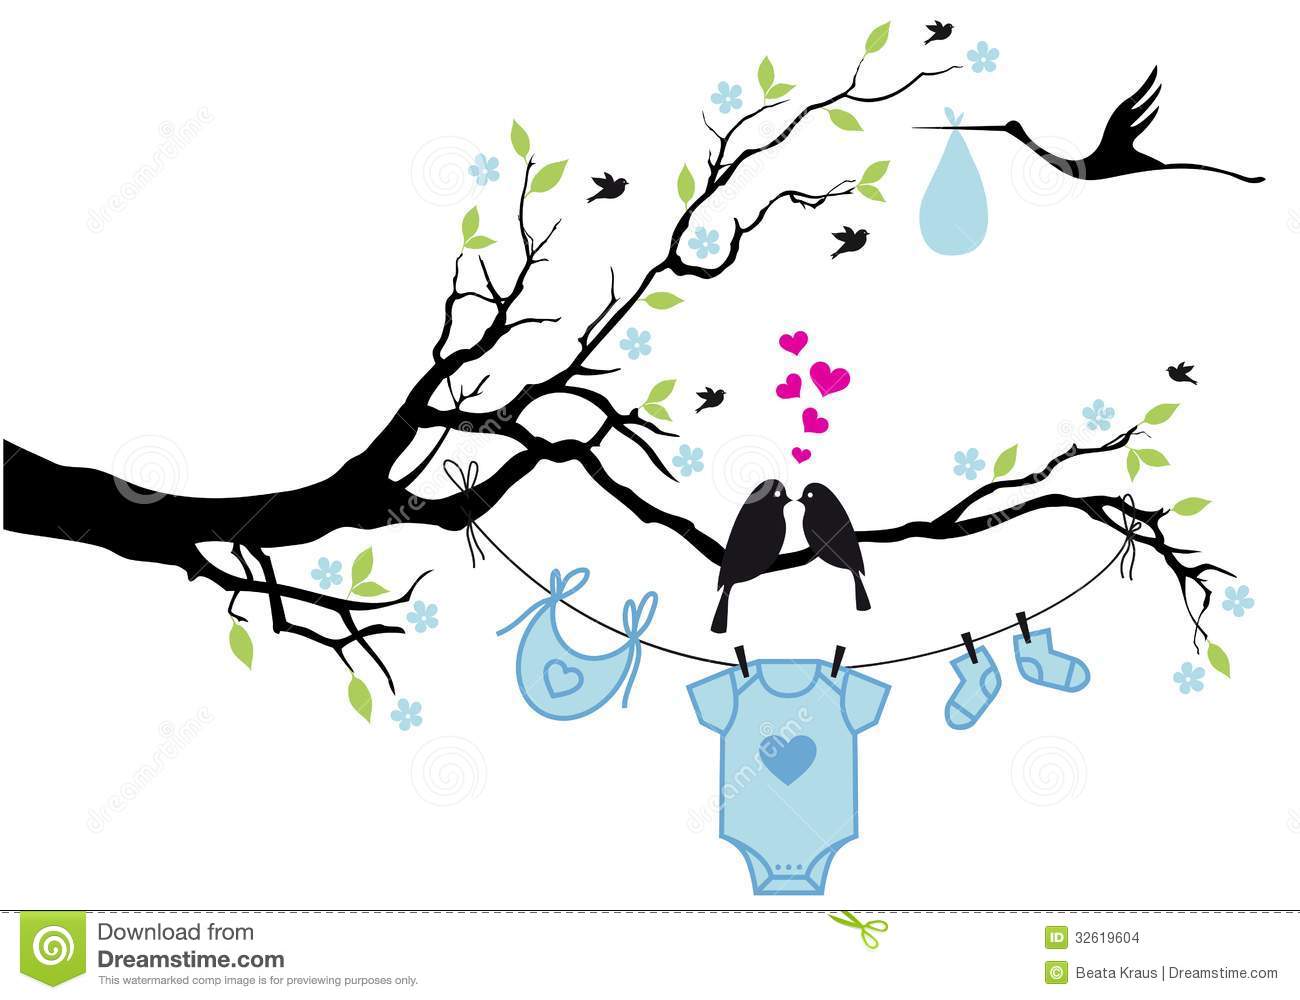 Family Tree Background Graphics   Clipart Panda   Free Clipart Images